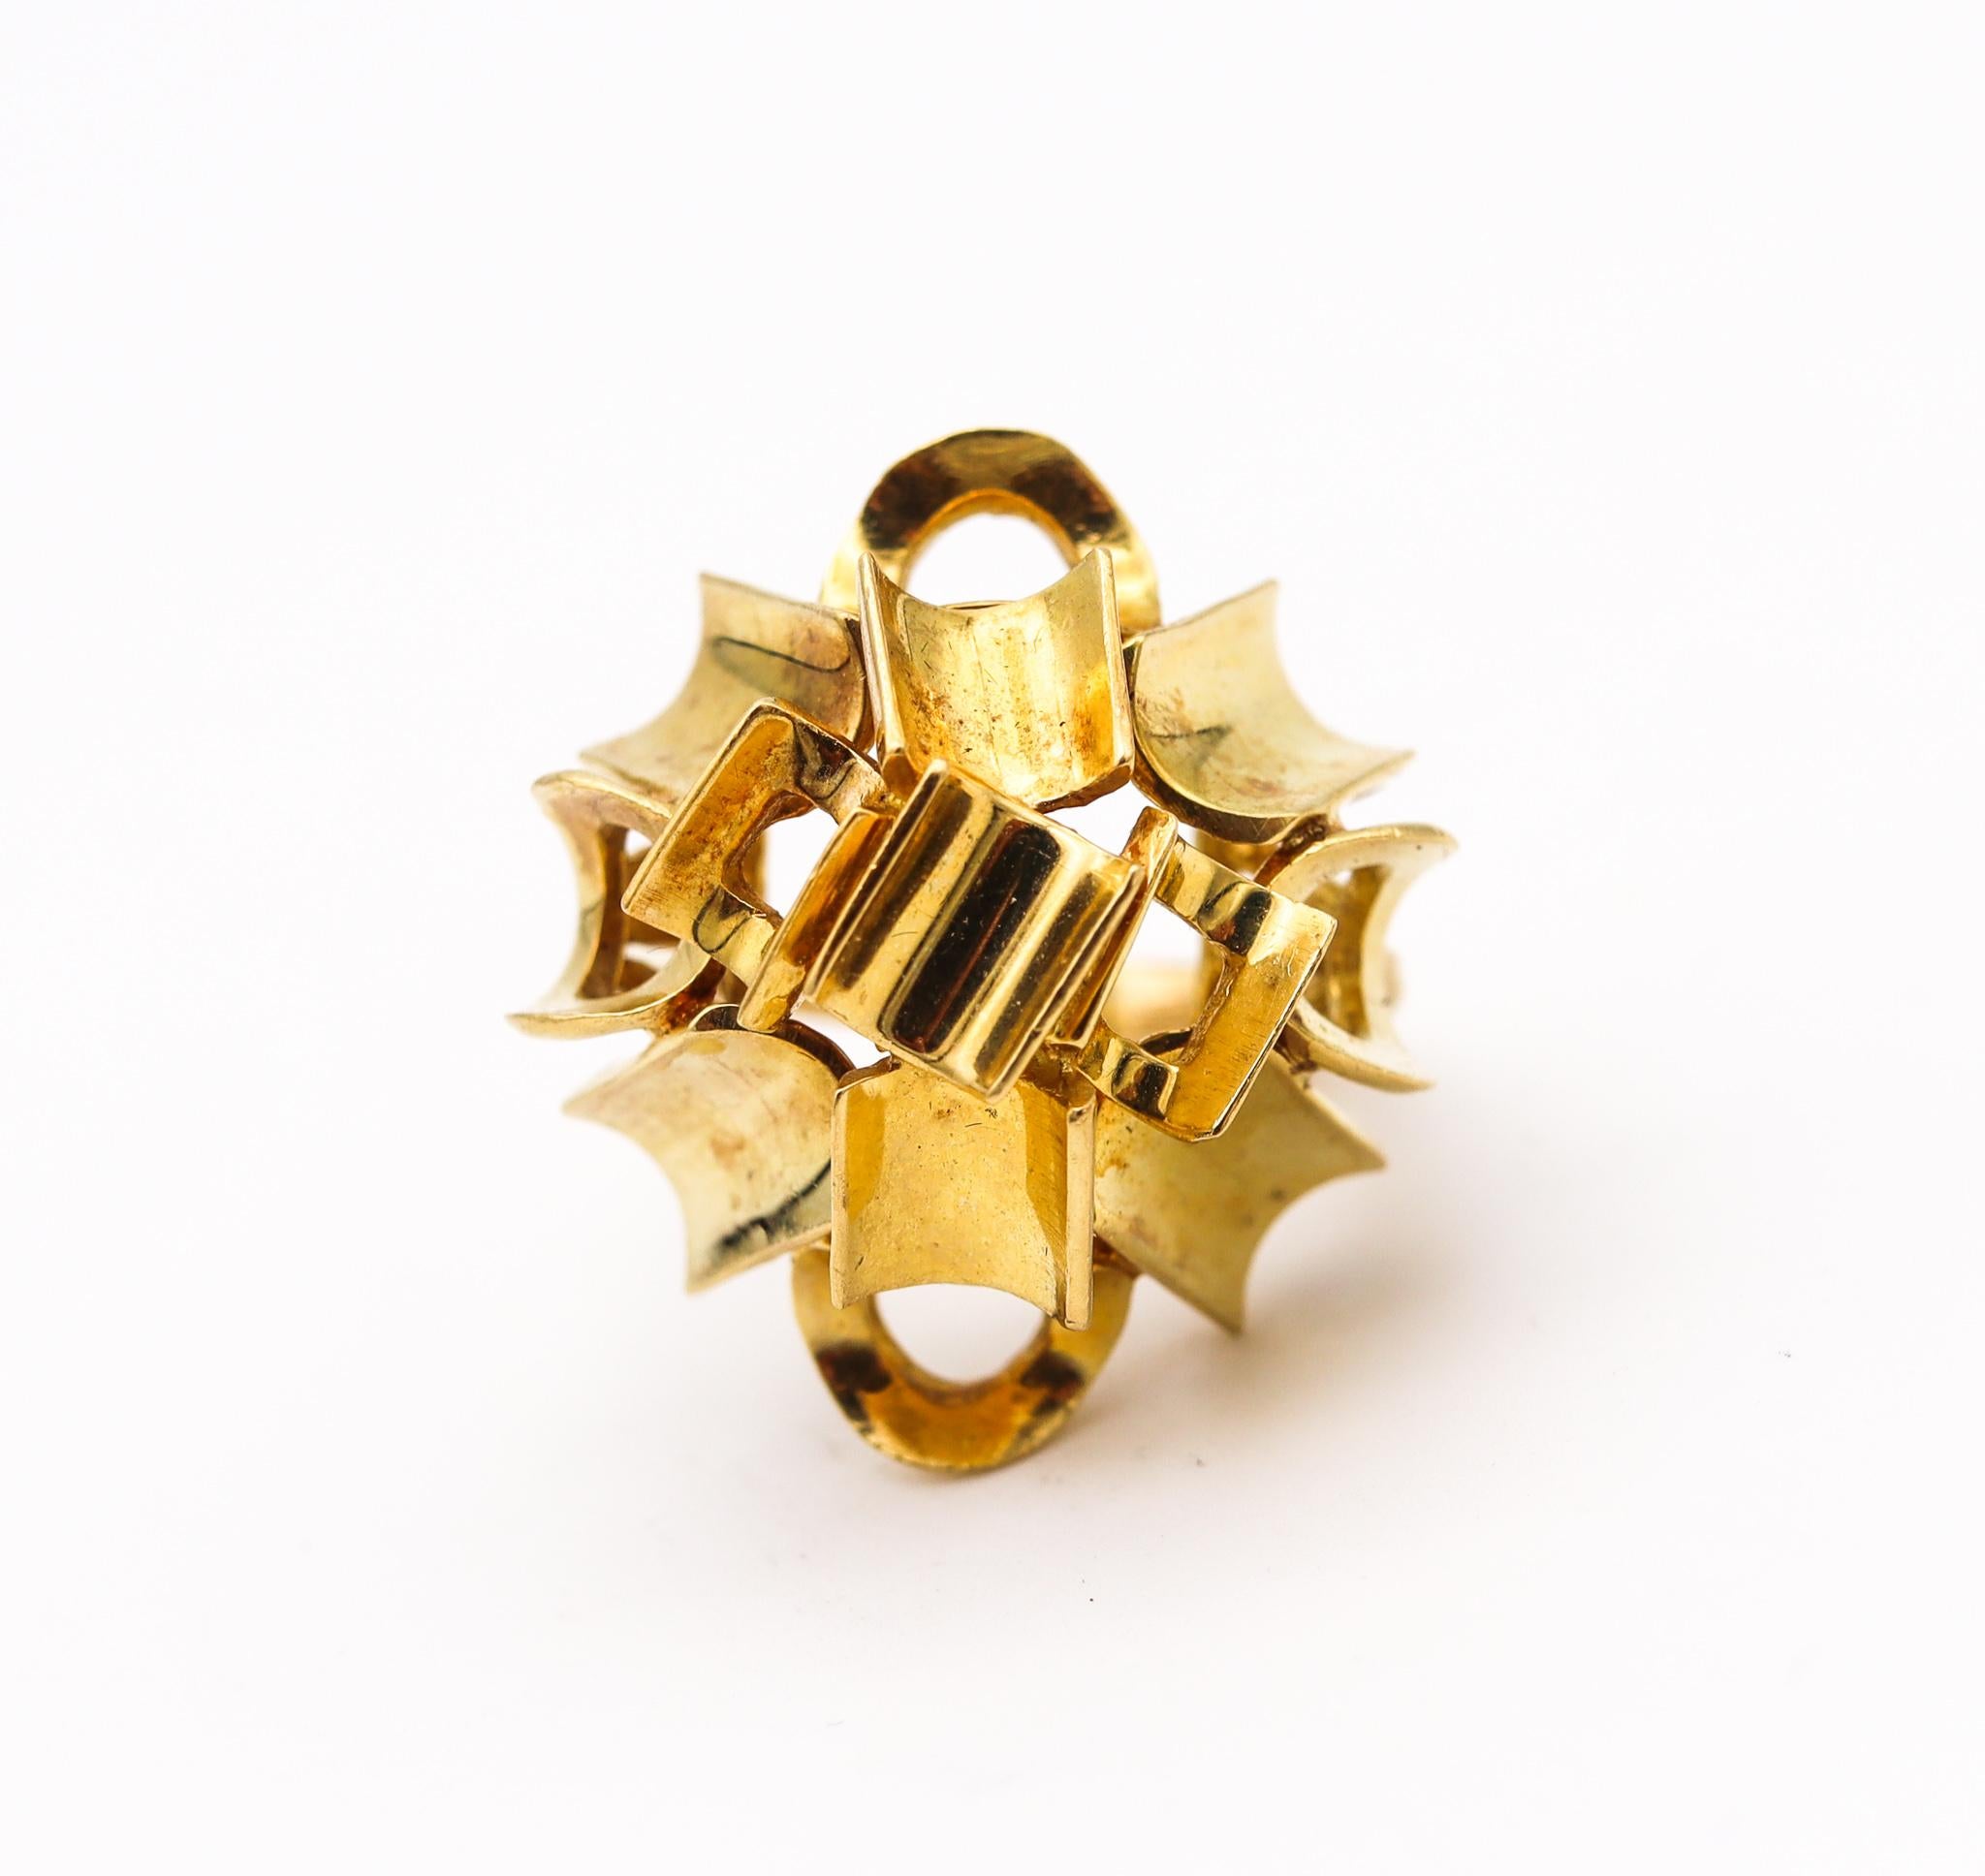 Geometric brutalist ring from the 70's.

A beautiful, unusual and sculptural piece, created in Milano Italy, back in the 1970. This brutalist cocktail ring has been assemble with multiples geometric elements crafted in solid yellow gold of 18 karats